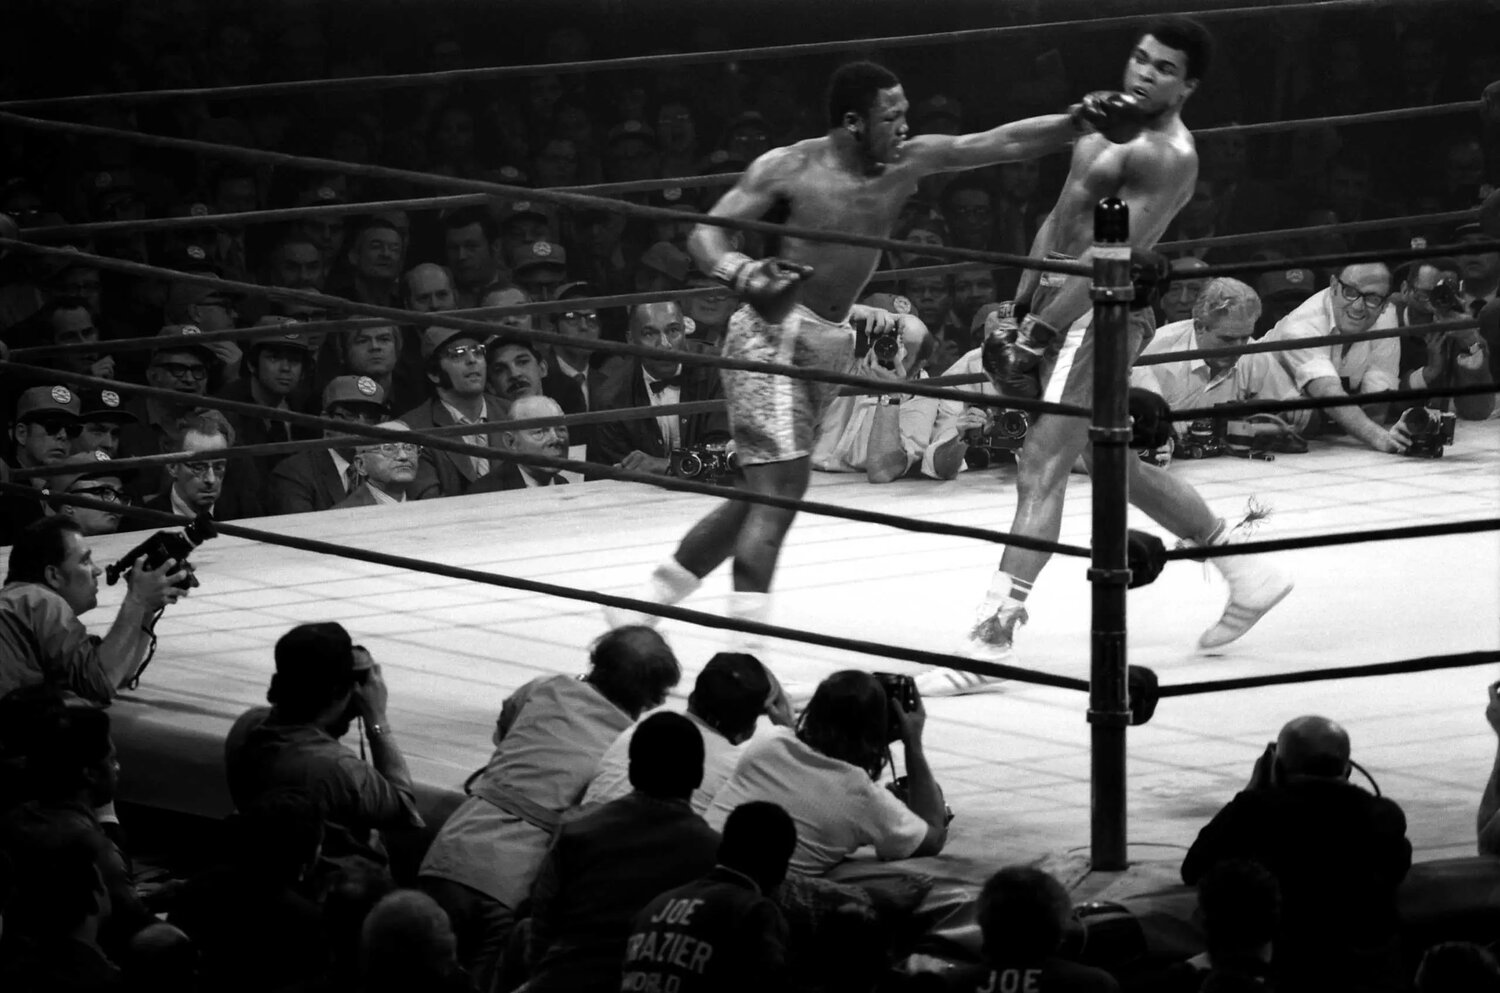 Joe Frazier (left) and Muhammad Ali battling the 'Fight of the Century' at Madison Square Garden on March 8, 1971. The original boxing ring along with the posts and ropes is on display at the Boxing Hall of Fame.